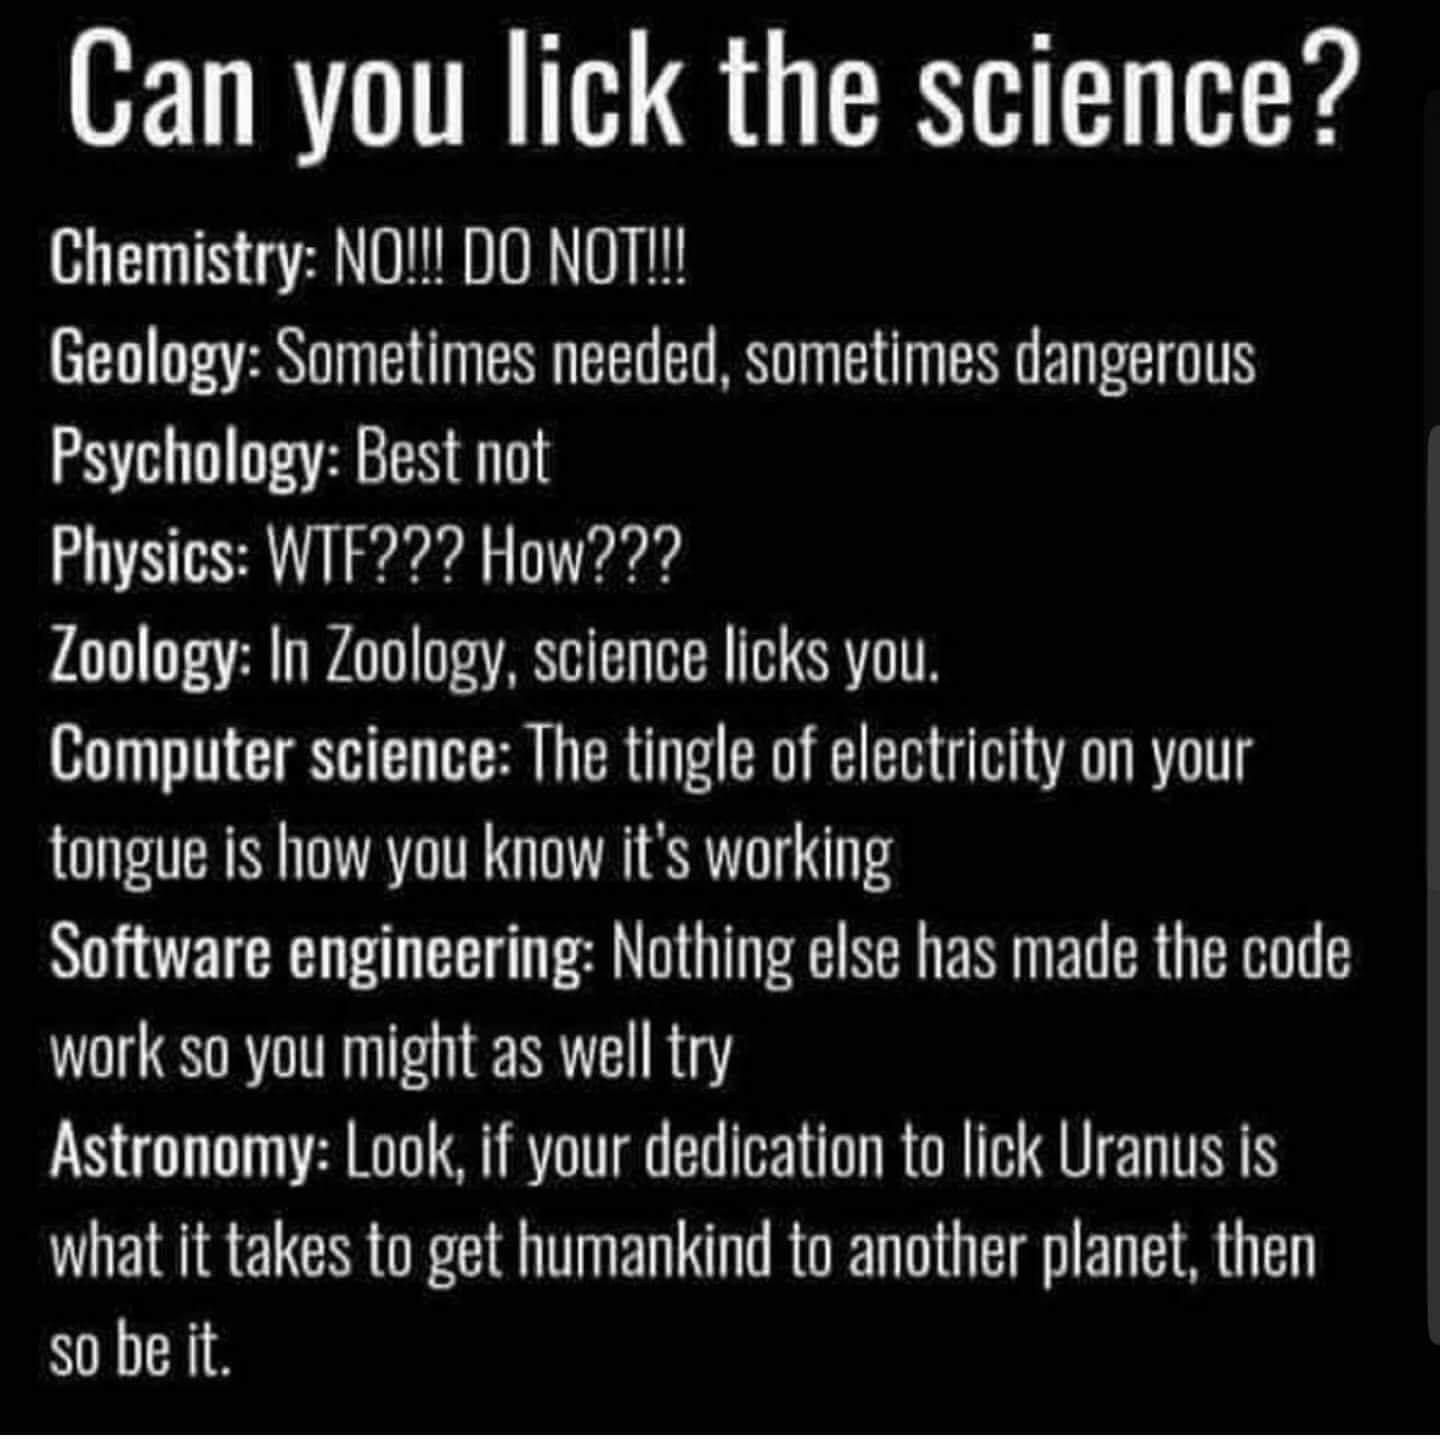 Can you lick the science?